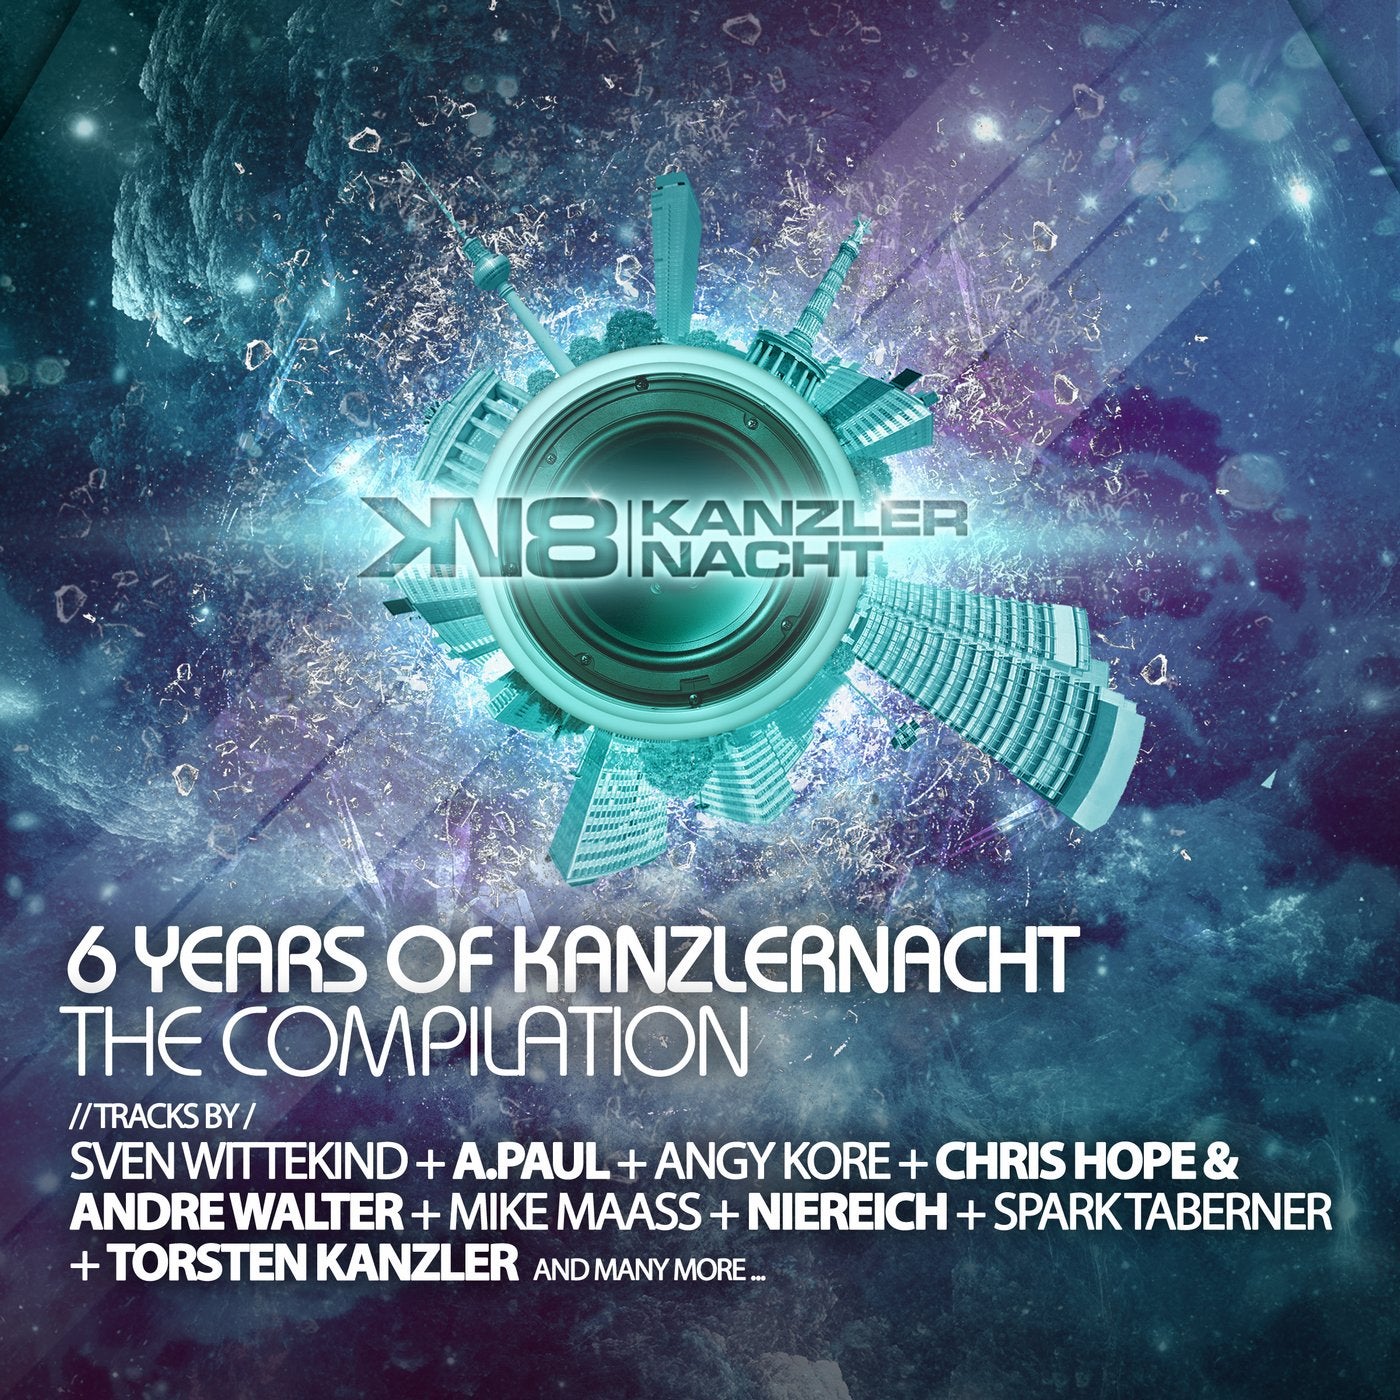 6 Years of Kanzlernacht - The Compilation